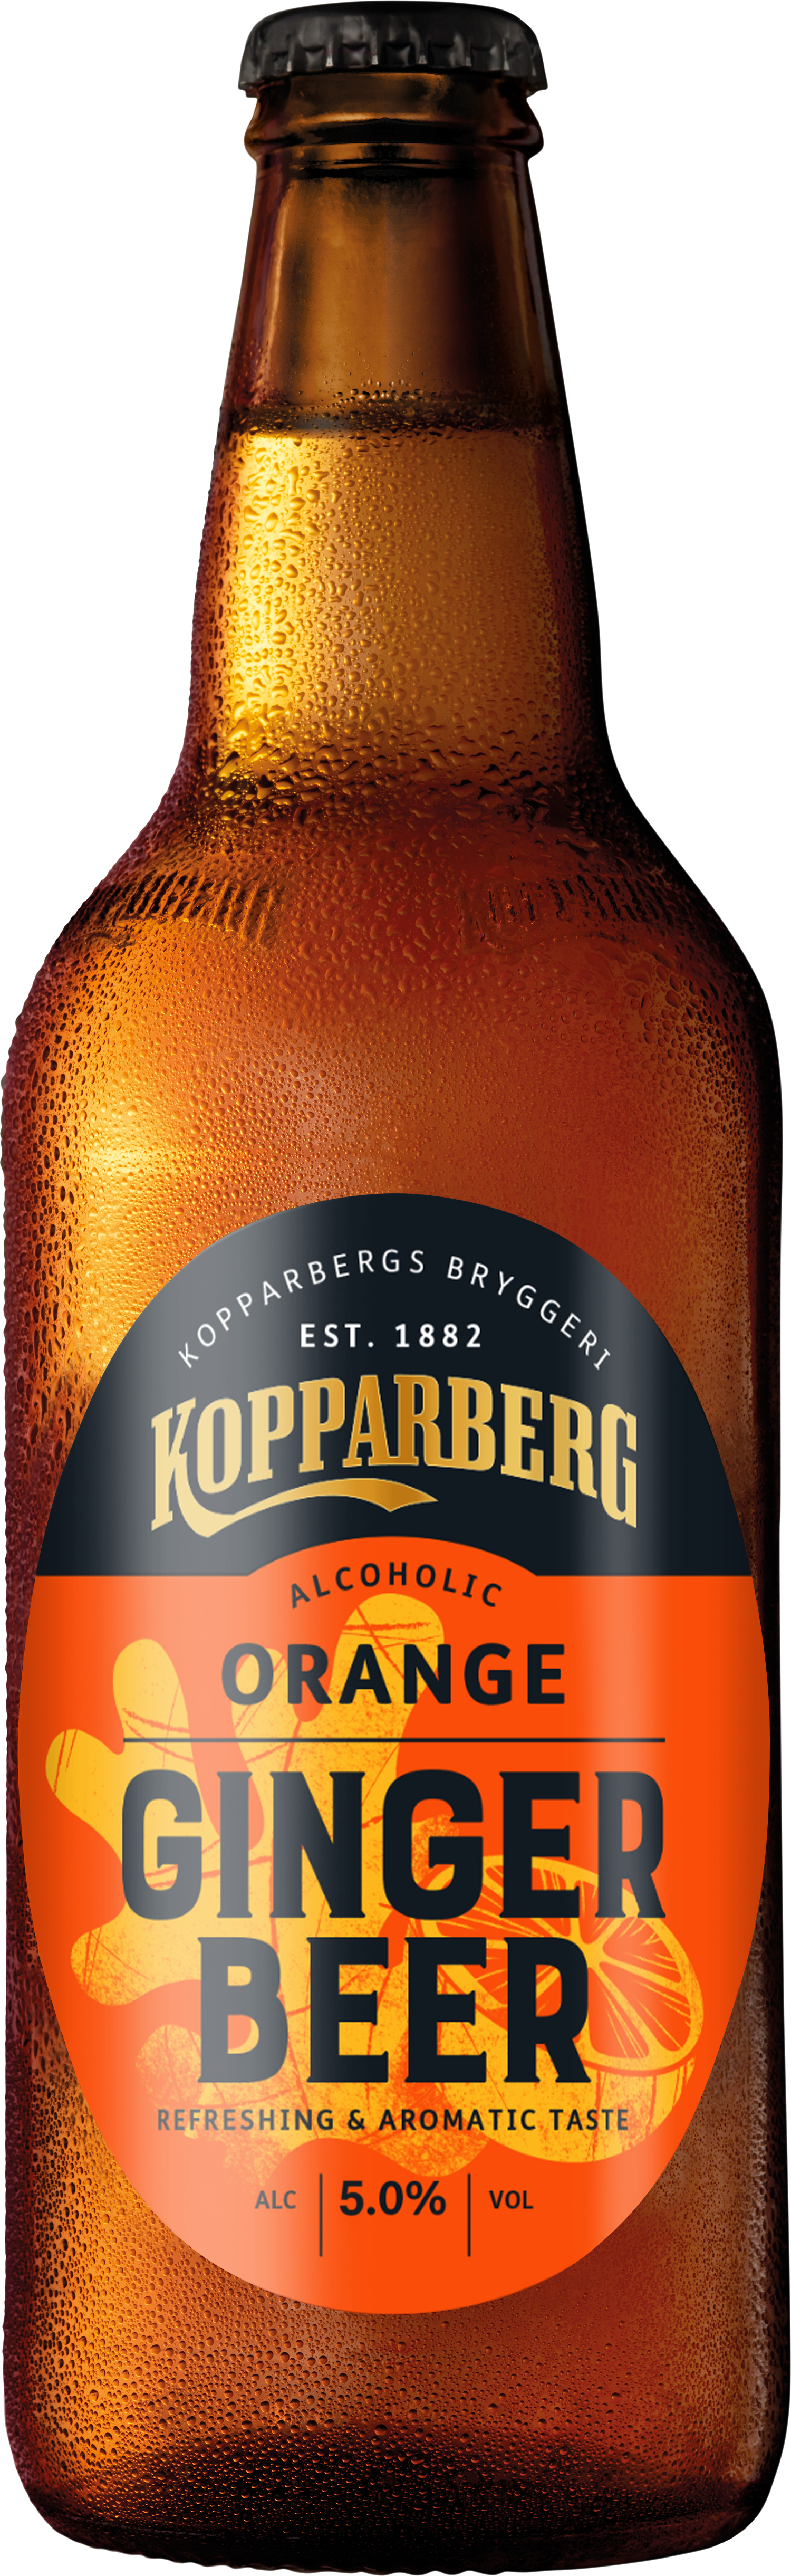 Kopparberg spices up category with brand-new alcoholic ginger beer